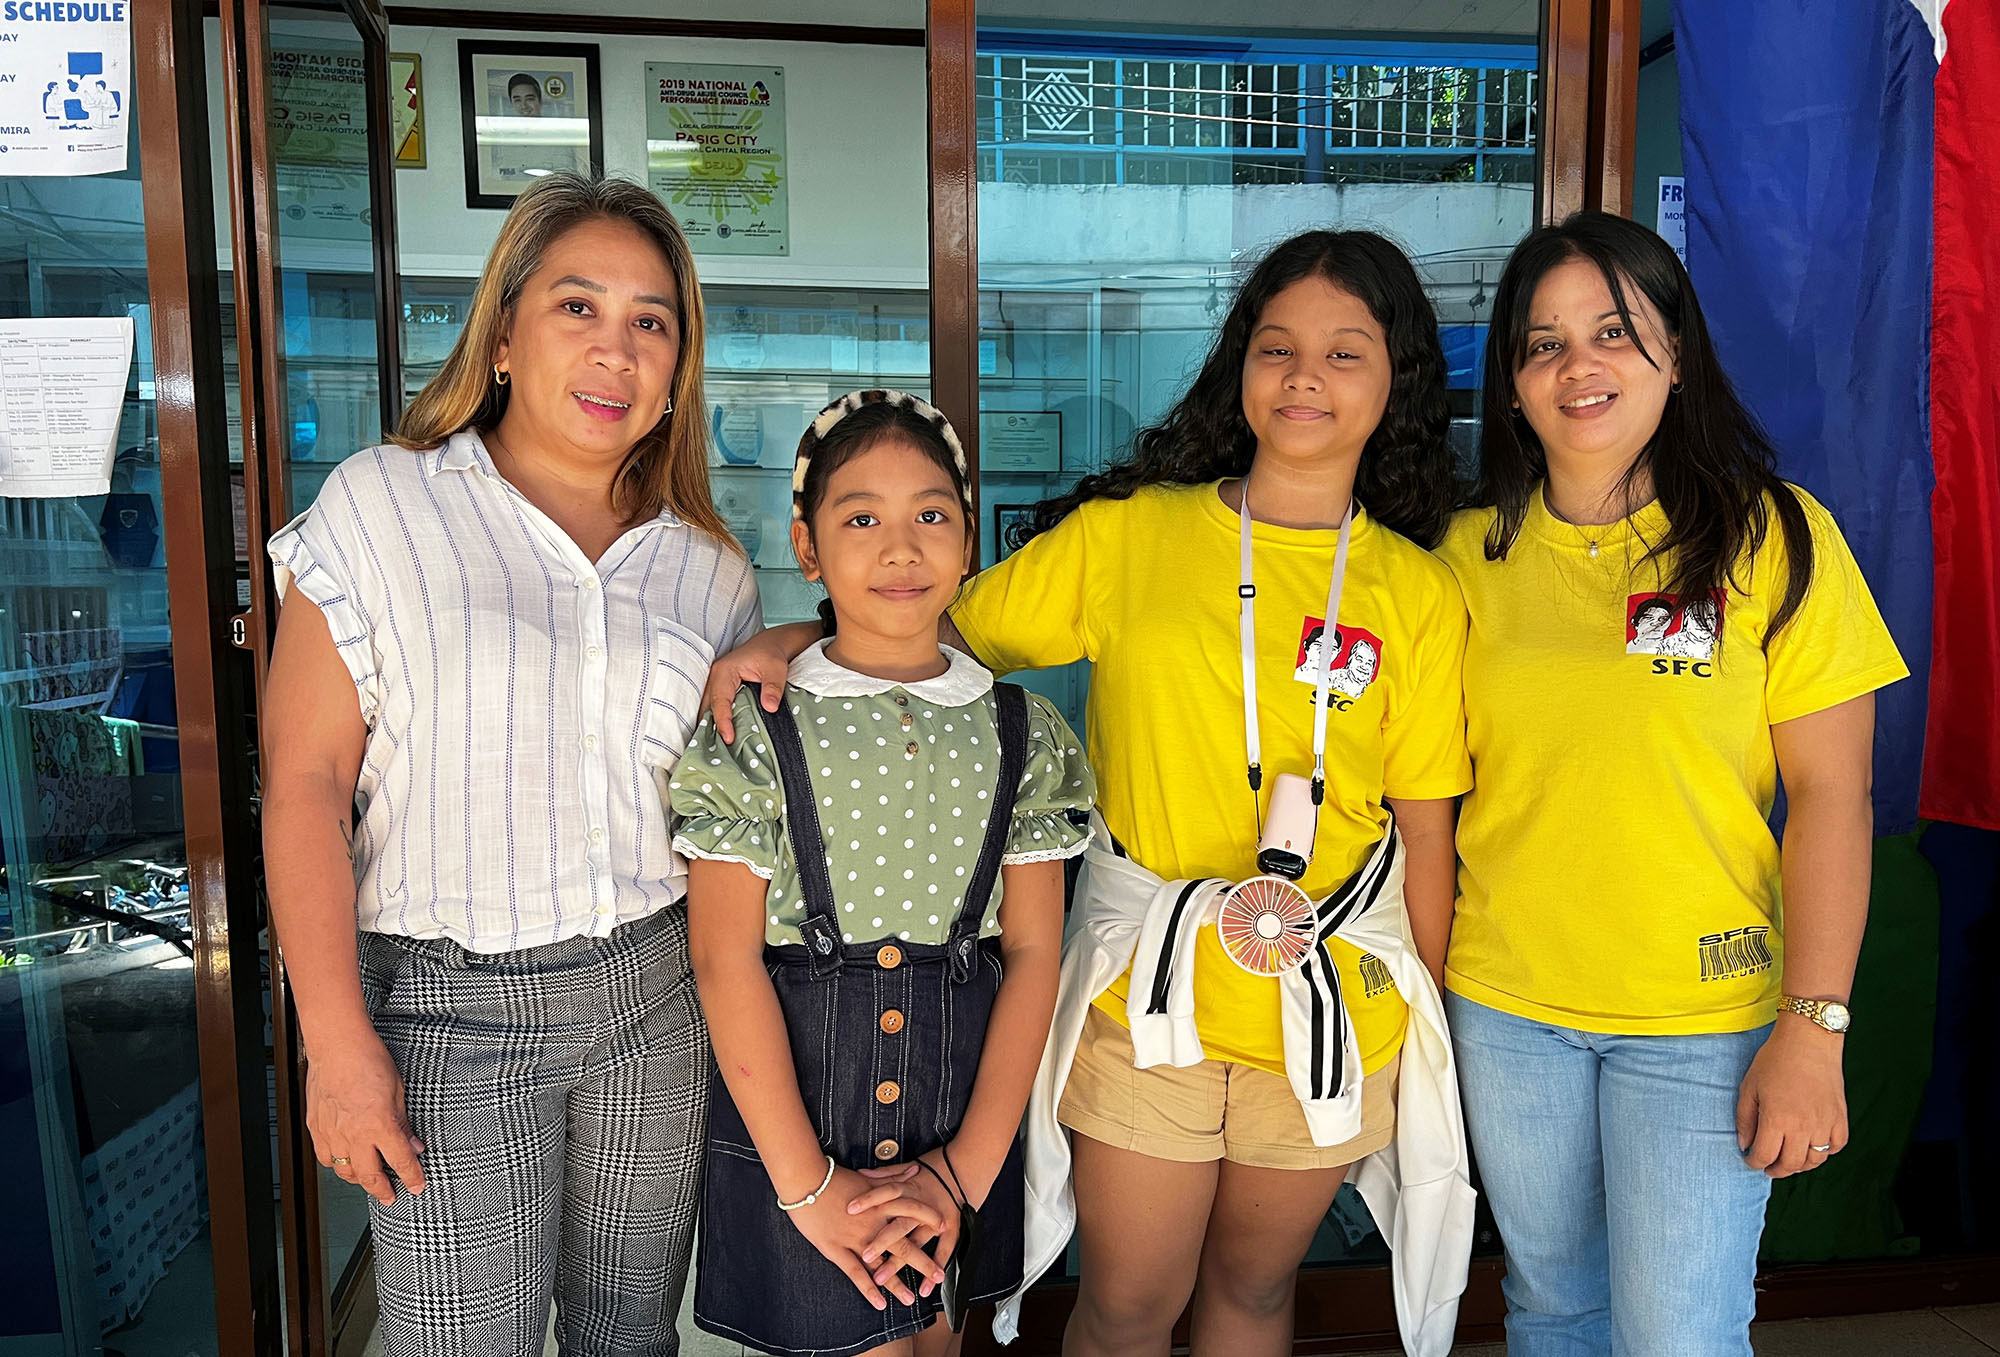 Arlene Alvarez (left) and Rowena Cruz (right) and their daughters Wasmiya and Angelique met at the Strong Families Programme in Pasig City, Philippines.